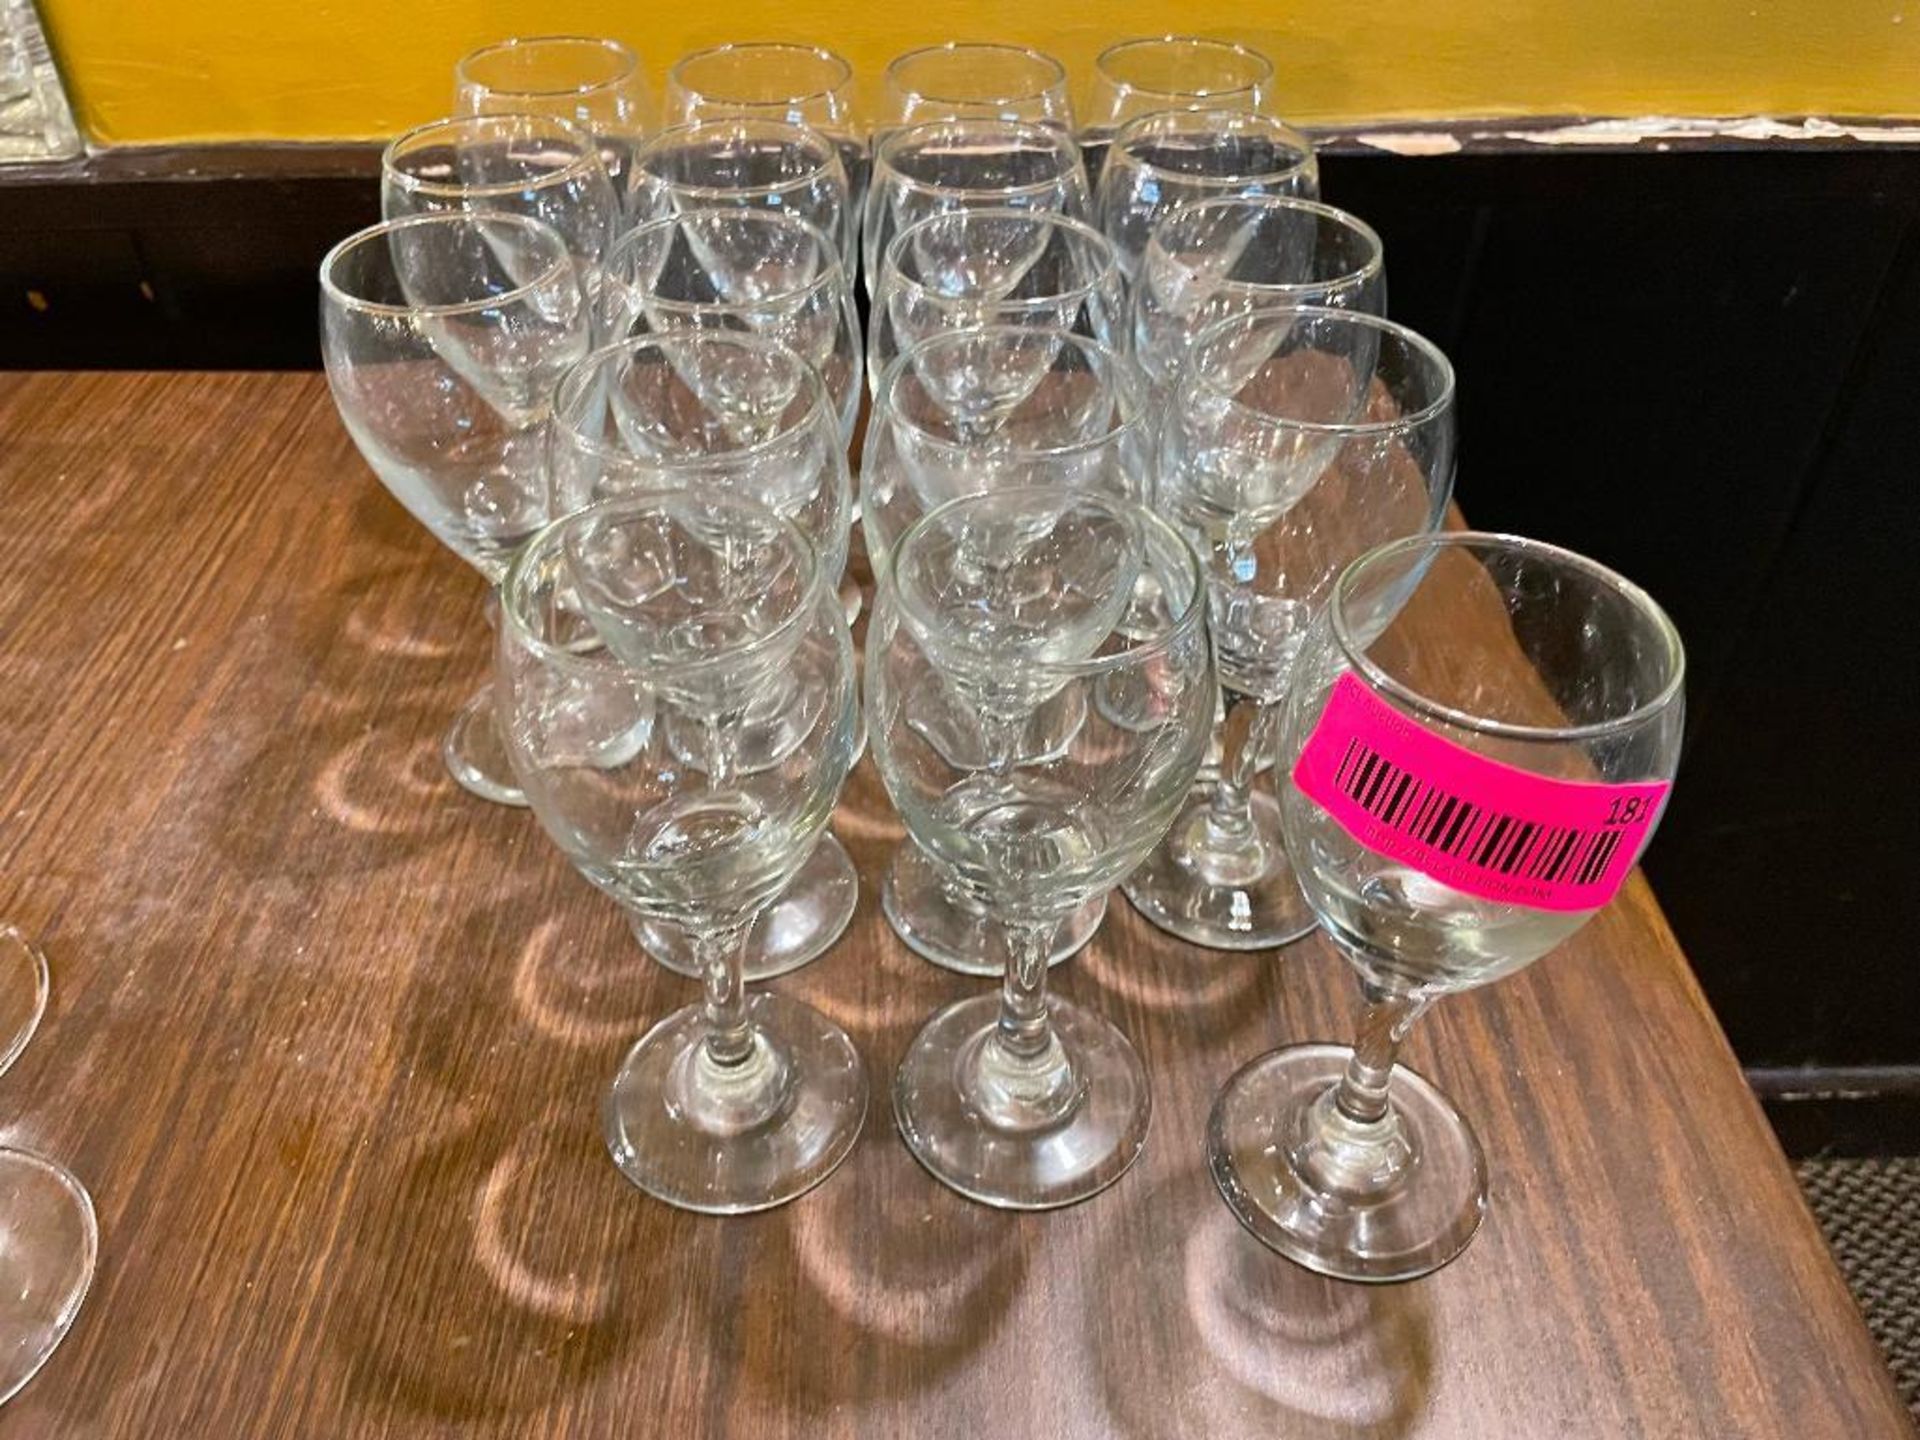 DESCRIPTION: (18) SMALL WINE GLASSES LOCATION: SEATING THIS LOT IS: SOLD BY THE PIECE QTY: 18